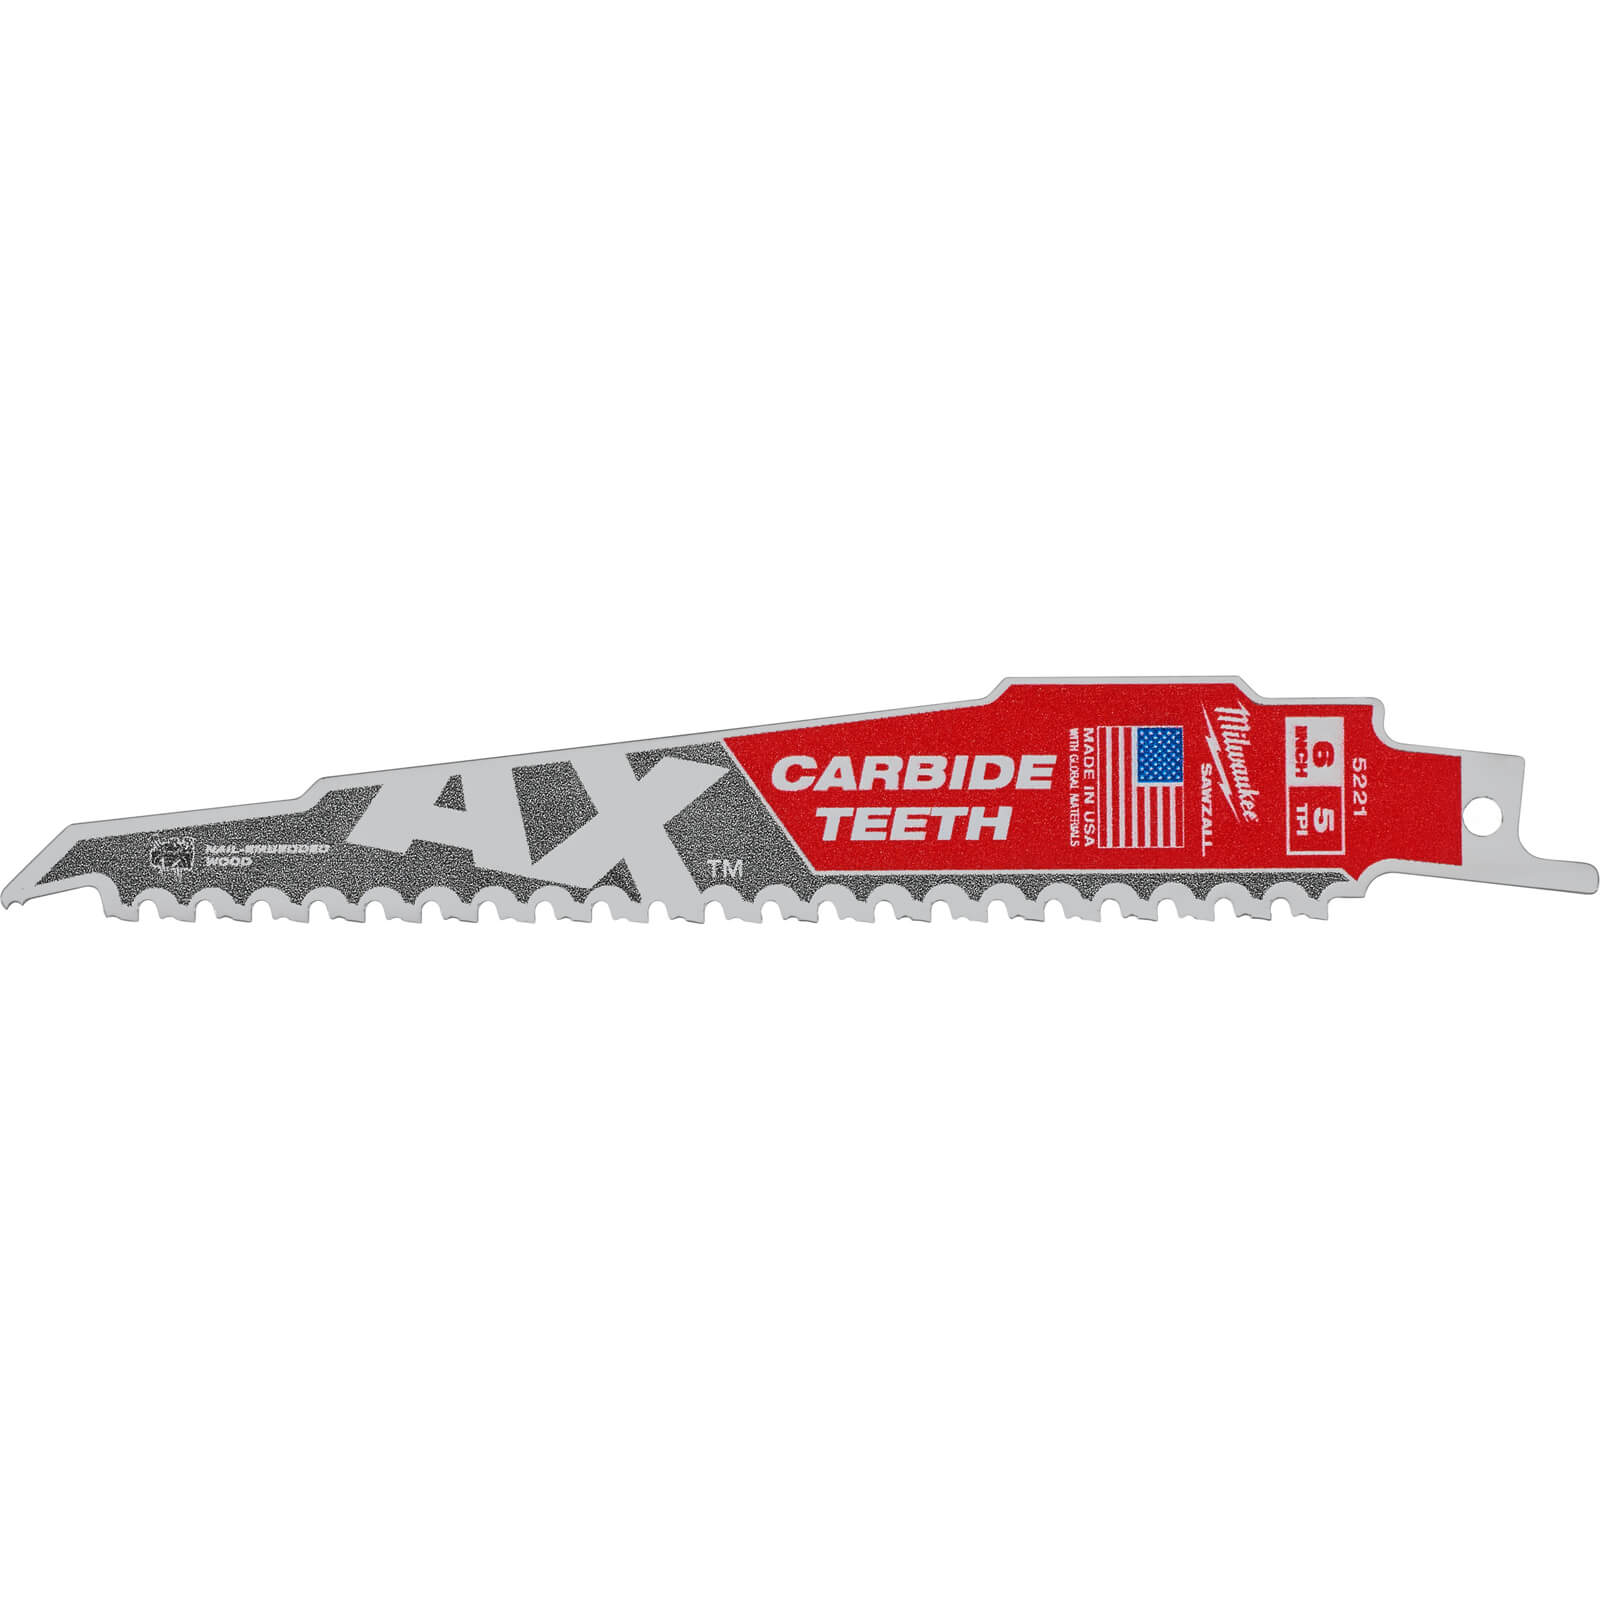 Image of Milwaukee Heavy Duty AX Carbide Demolition Reciprocating Sabre Saw Blades 150mm Pack of 5